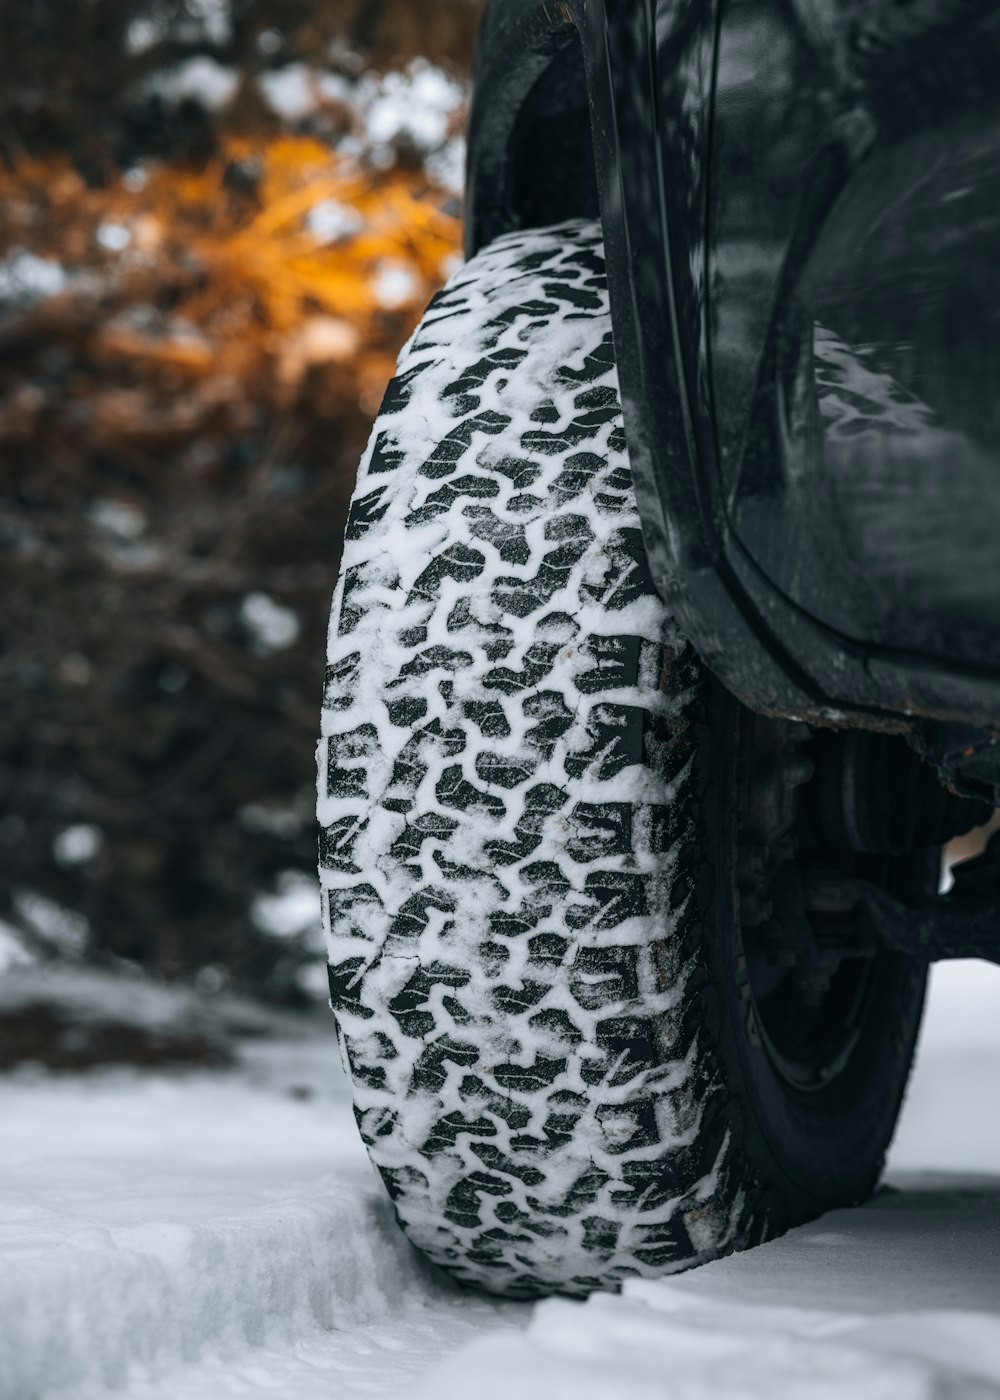 the tire of a truck is covered in snow